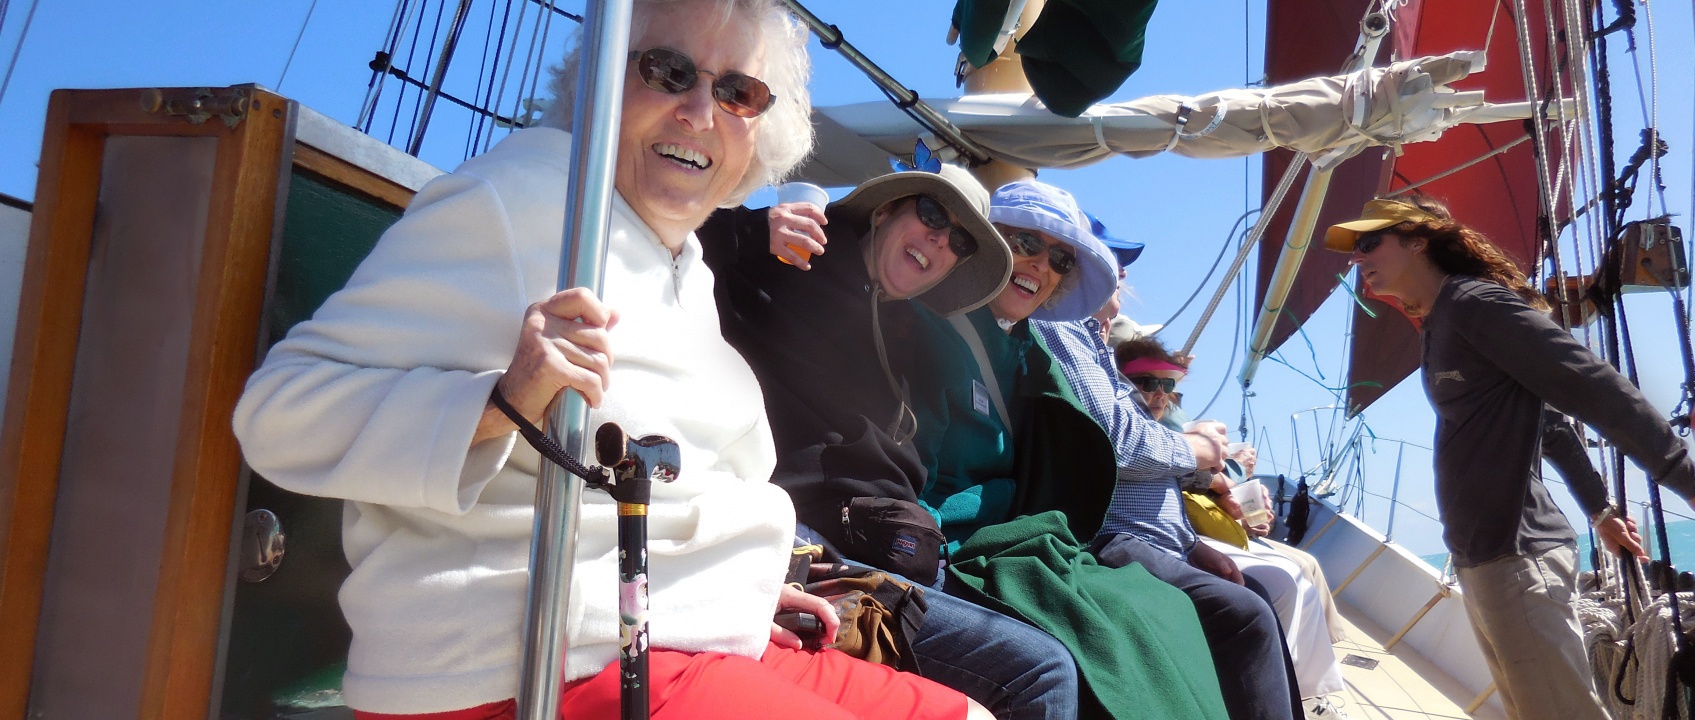 Sports Leisure travelers on a boat in Key West, Florida